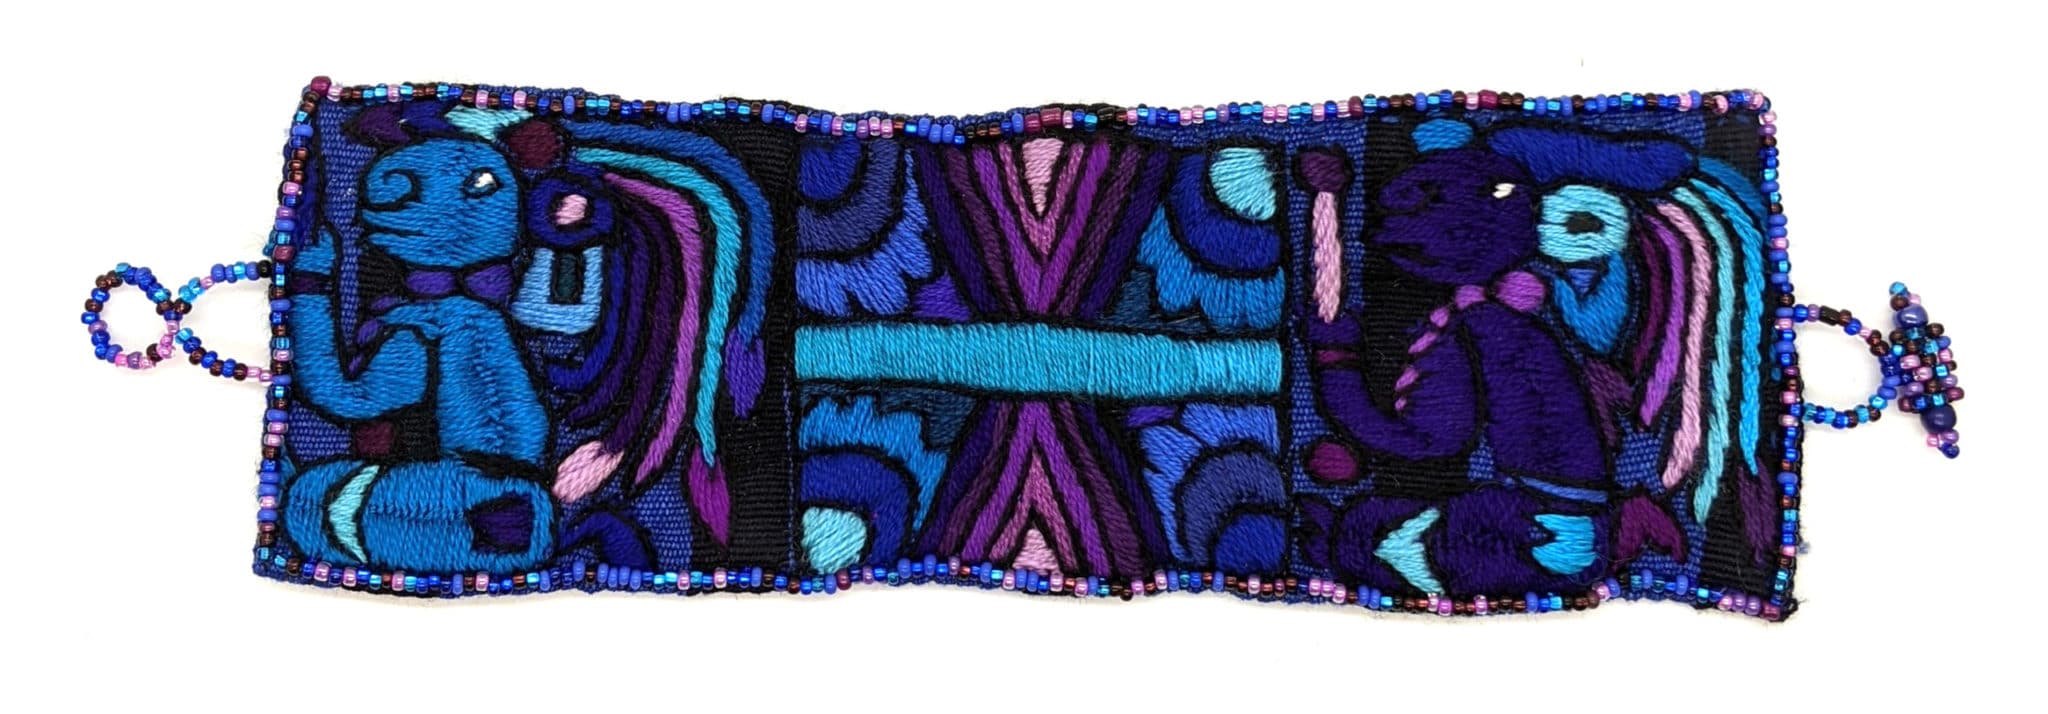 Blues and Purples Maya Gods and Symbols Hand-Embroidered Bracelet with Glass Beads Closure